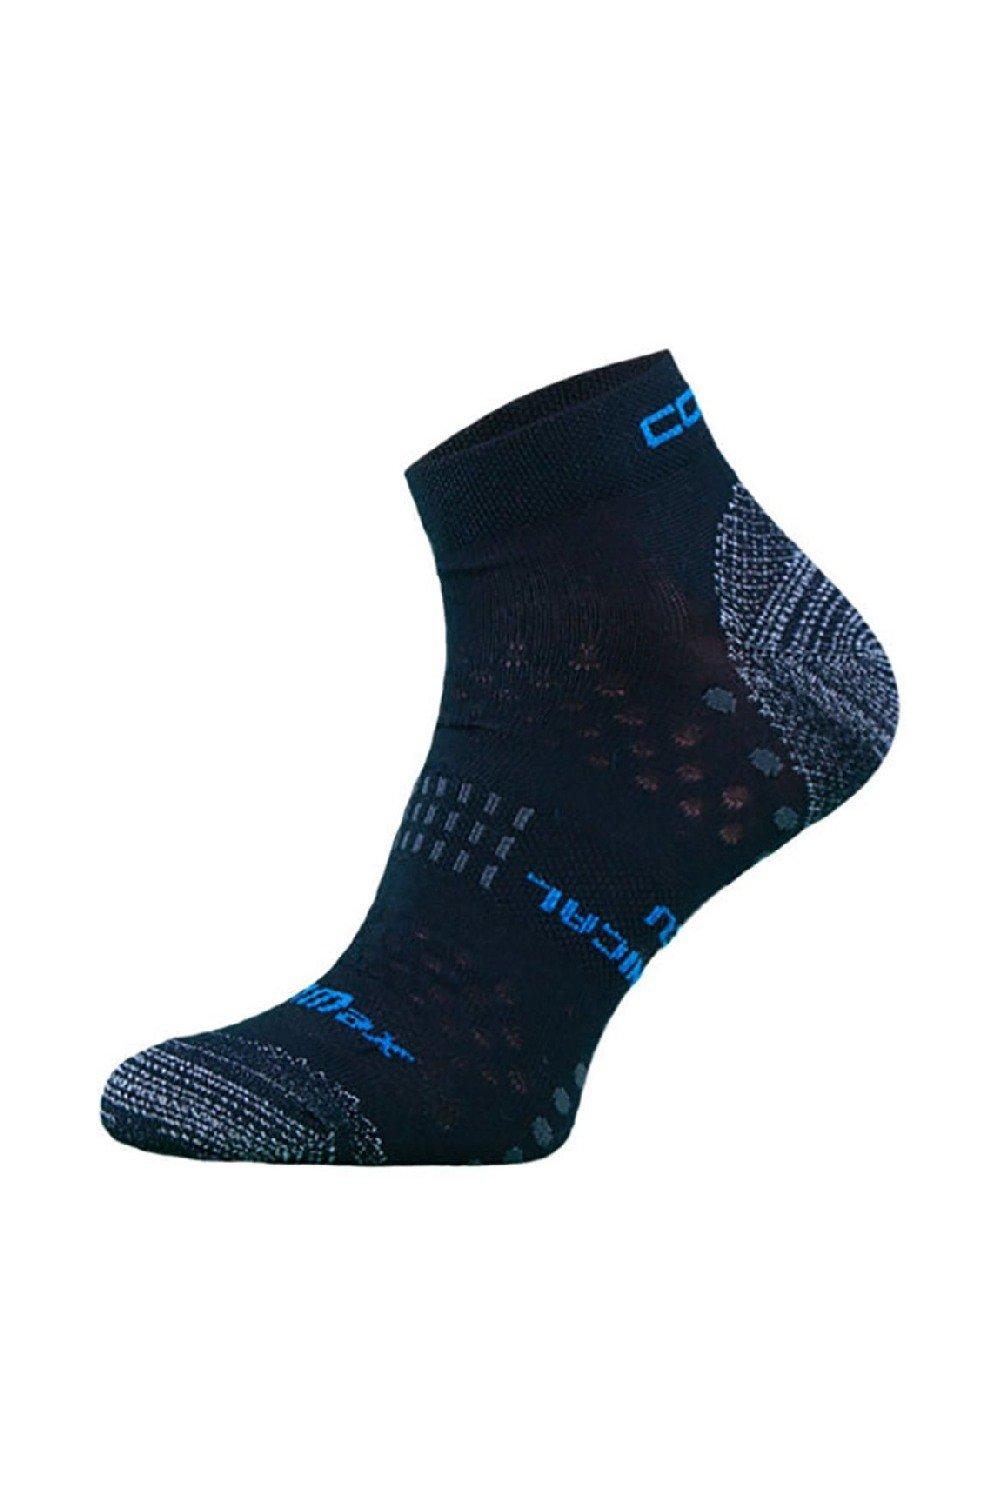 Coolmax Running Socks with Arch Grip Support